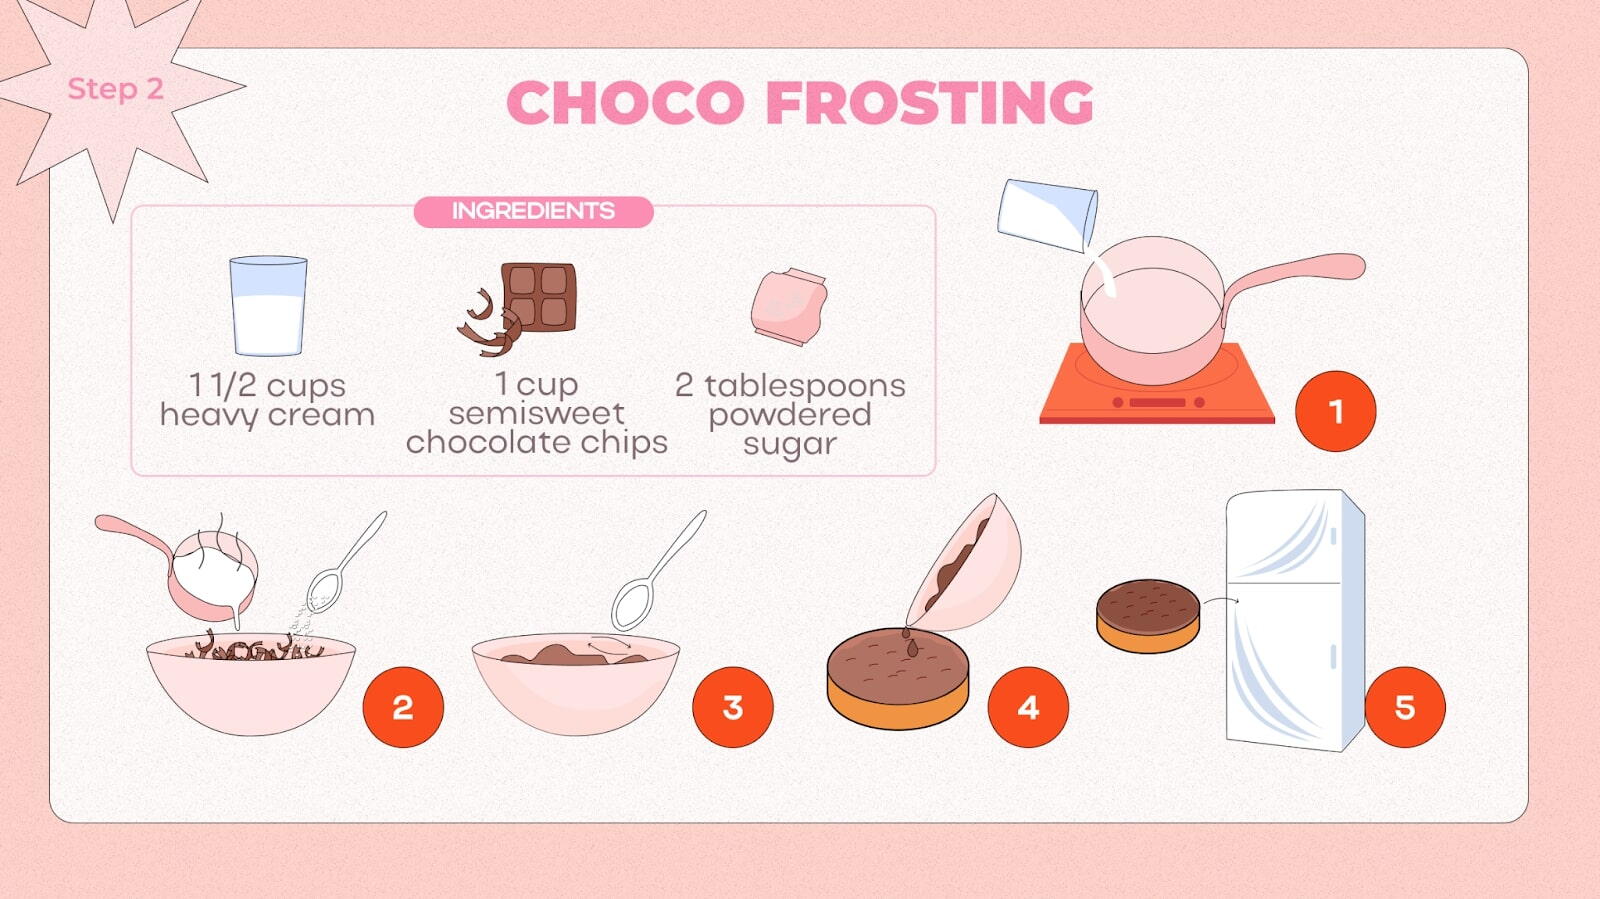 Instruction for make the Choco Frosting